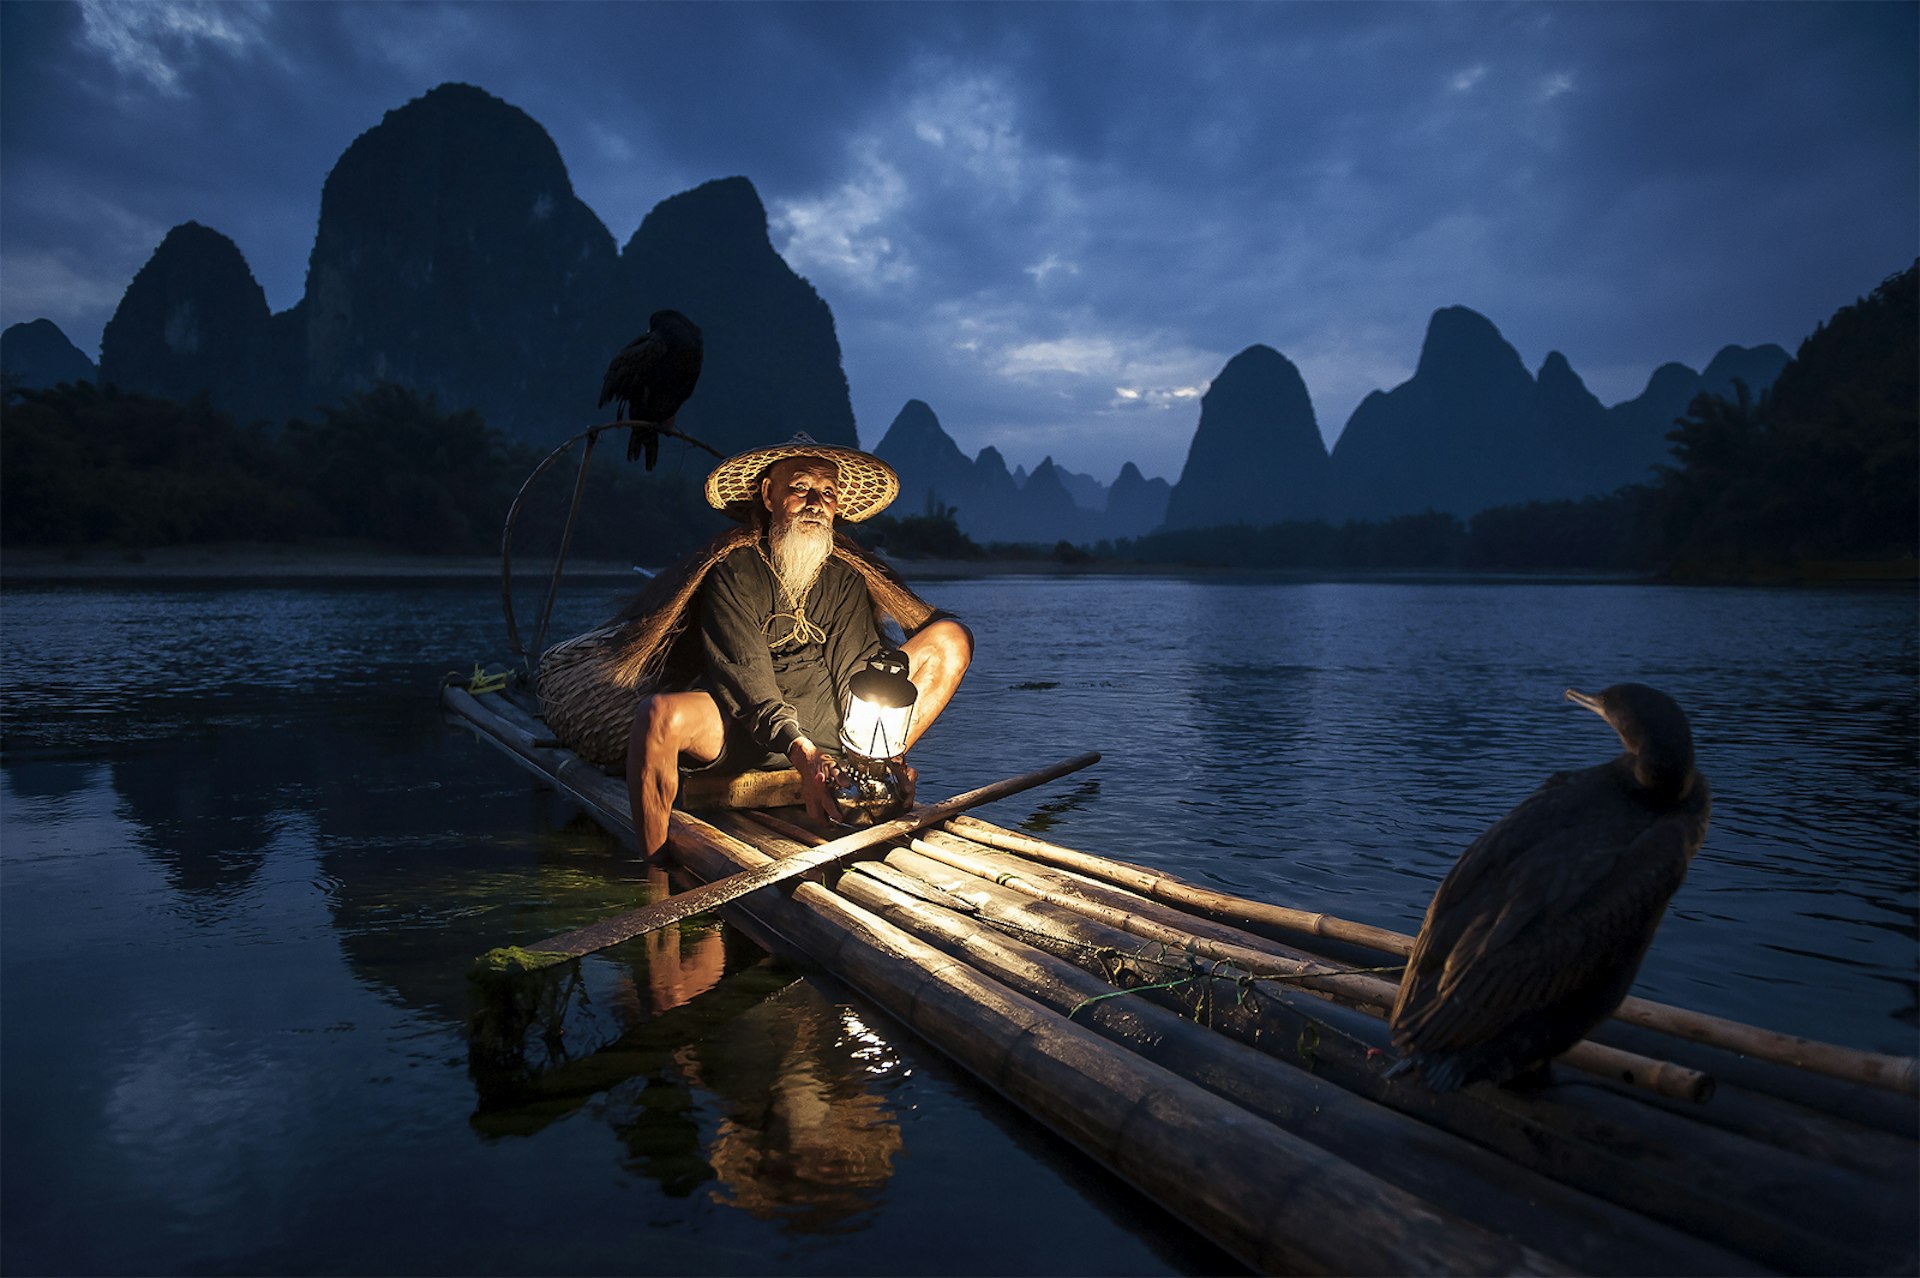 A boatman in Guilin, China; he sits in his long traditional boat made from tree branches at night, with a lantern illuminating him; he wears a wide-brimmed hat. There is a bird of prey sat at oneend of the vessel while in the background are a stretch of water and dramatic karst mountains.